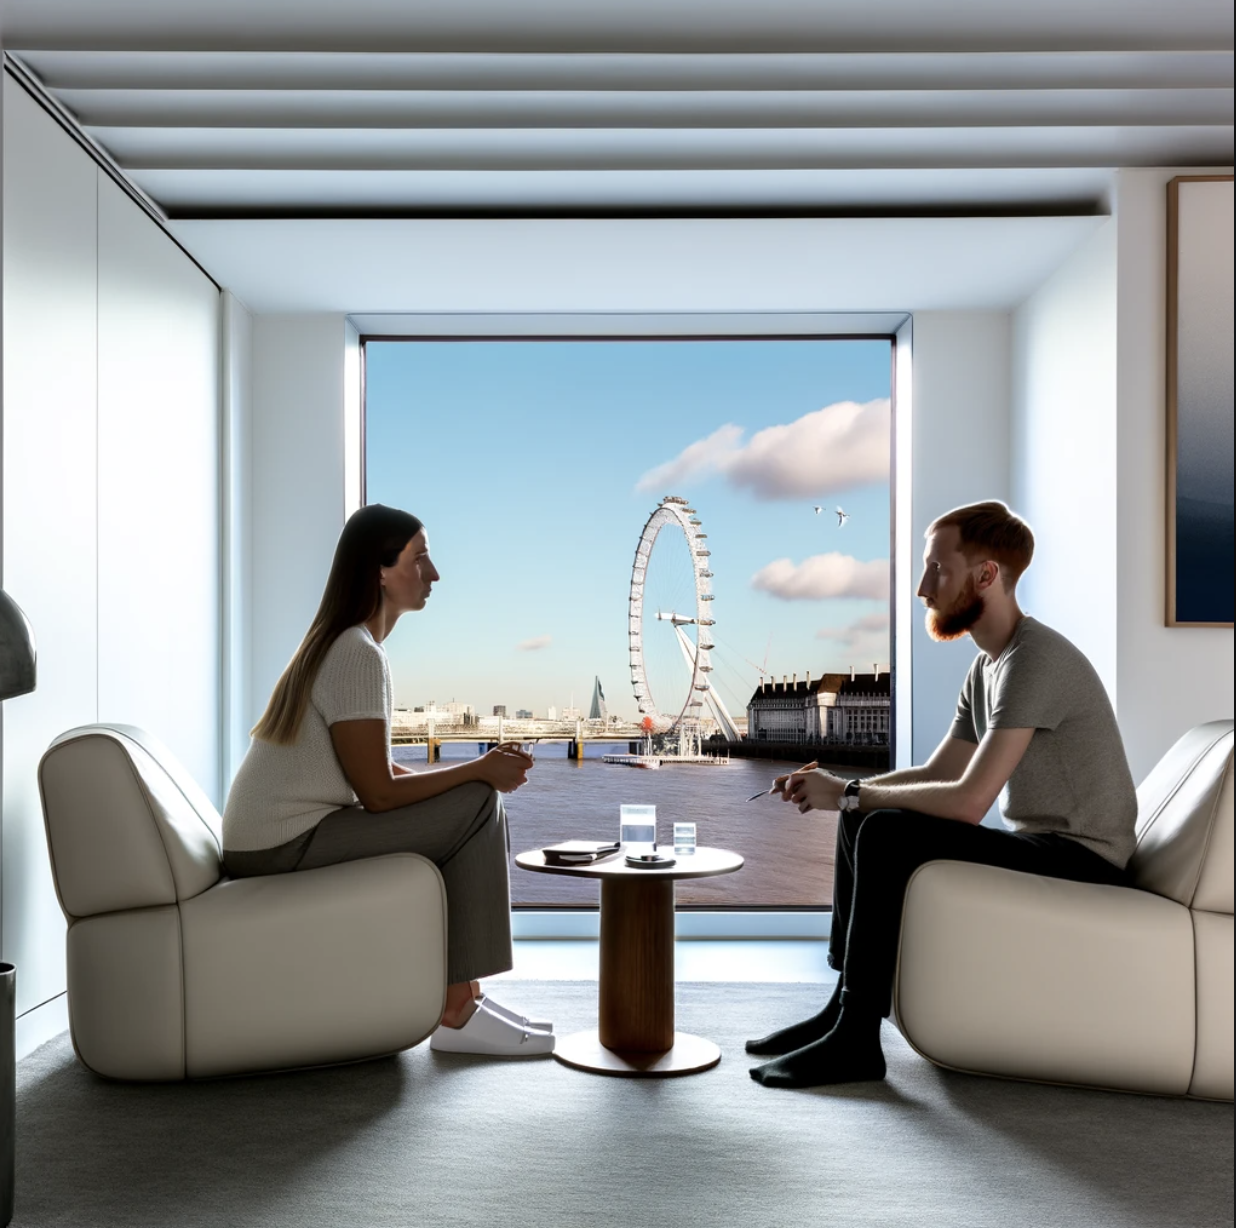 Focused DBT therapy session with a panoramic view of London's skyline, featuring the London Eye and the Shard, through the therapy room's window.